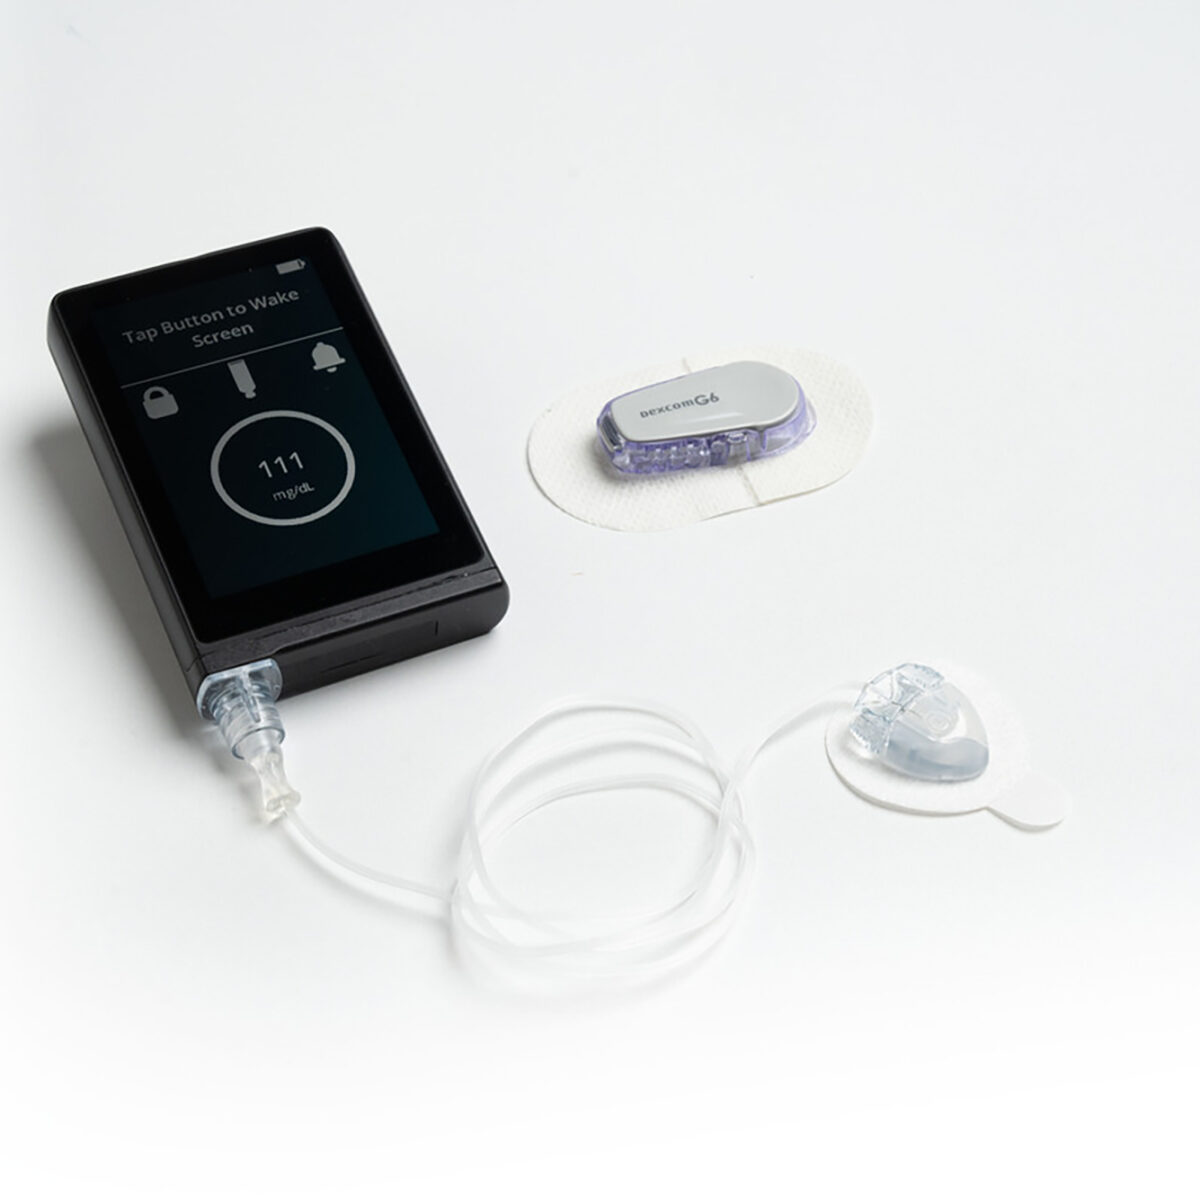 FDA Clears Bionic Pancreas Developed in BU Lab for People with Type 1 Diabetes The Brink Boston University image